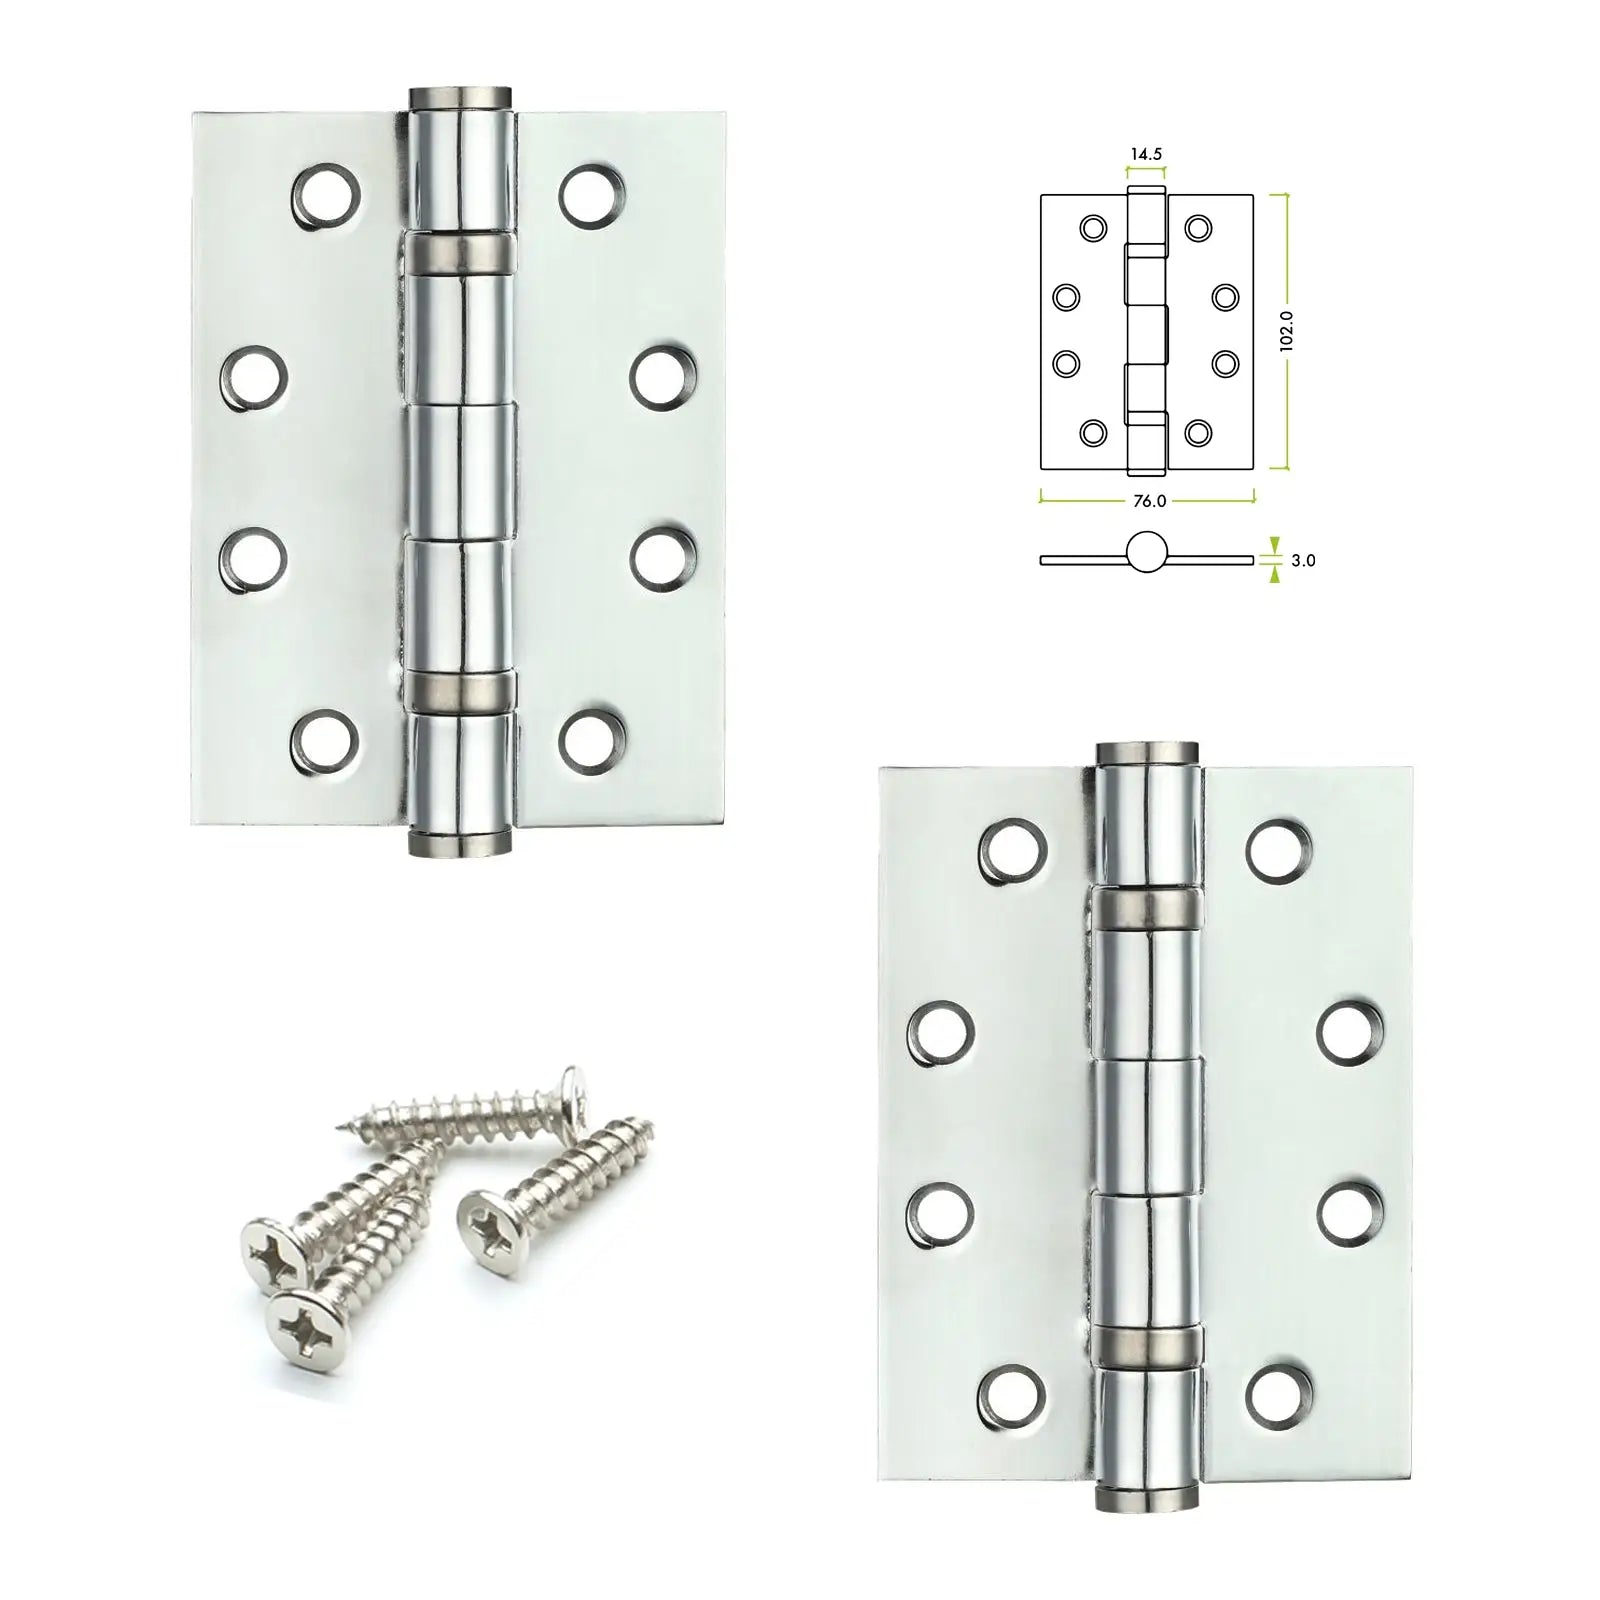 Ball Bearing Fire Rated Door Hinges - 102mm - Pair -  Polished Chrome - Decor And Decor